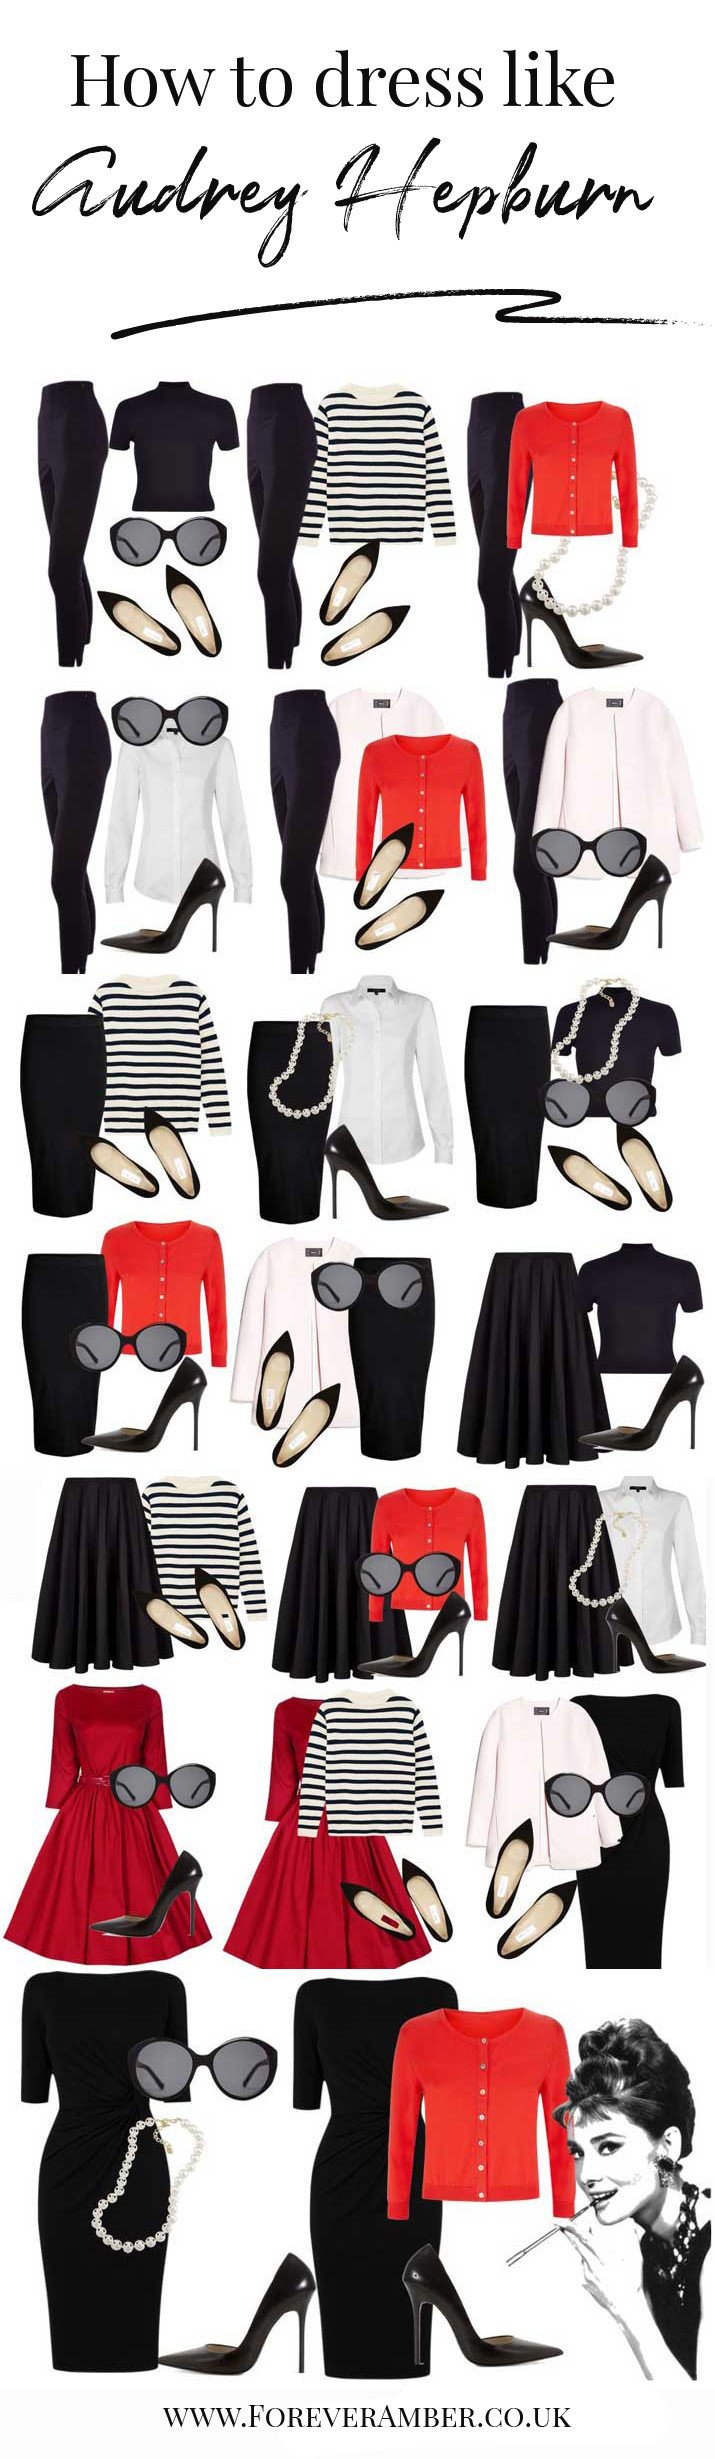 how to dress like Audrey Hepburn: create an Audrey Hepburn-inspired mix and match capsule wardrobe